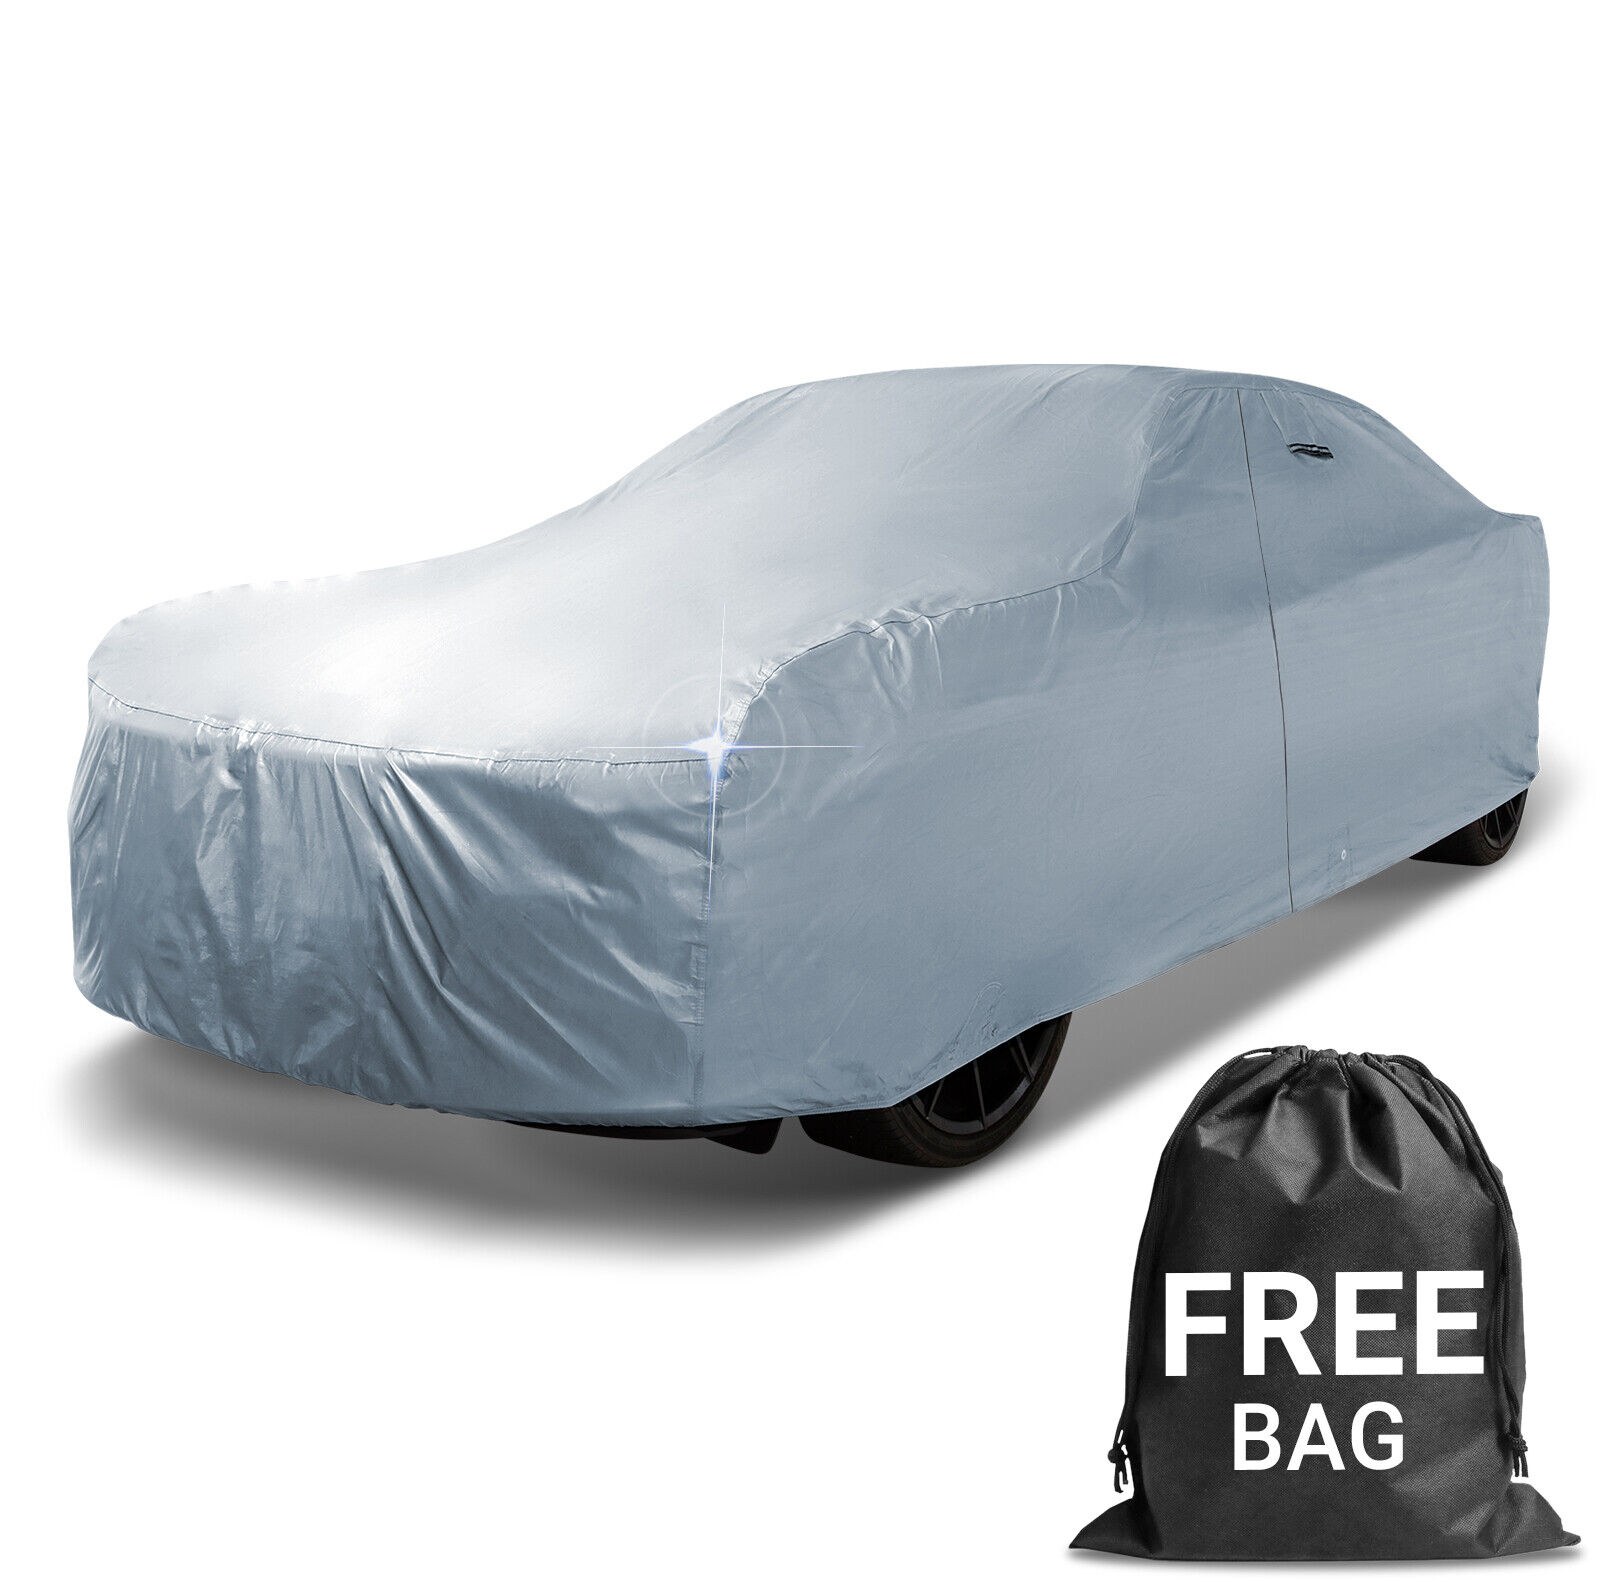 OLDSMOBILE [DYNAMIC 88] Custom Waterproof Outdoor Car Cover - All Weather